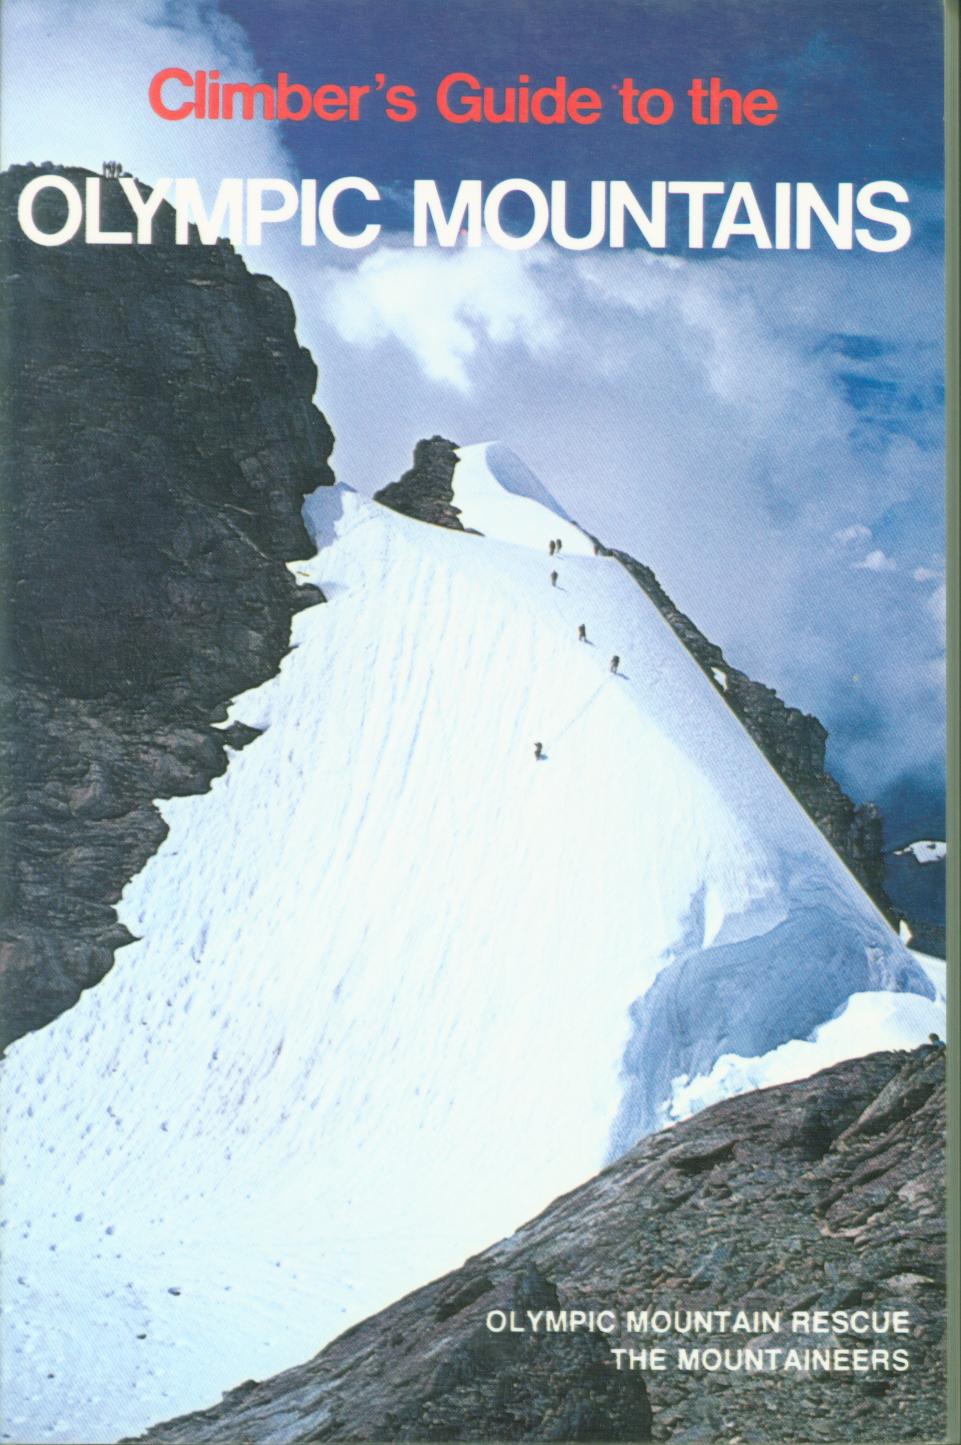 CLIMBER'S GUIDE TO THE OLYMPIC MOUNTAINS. b